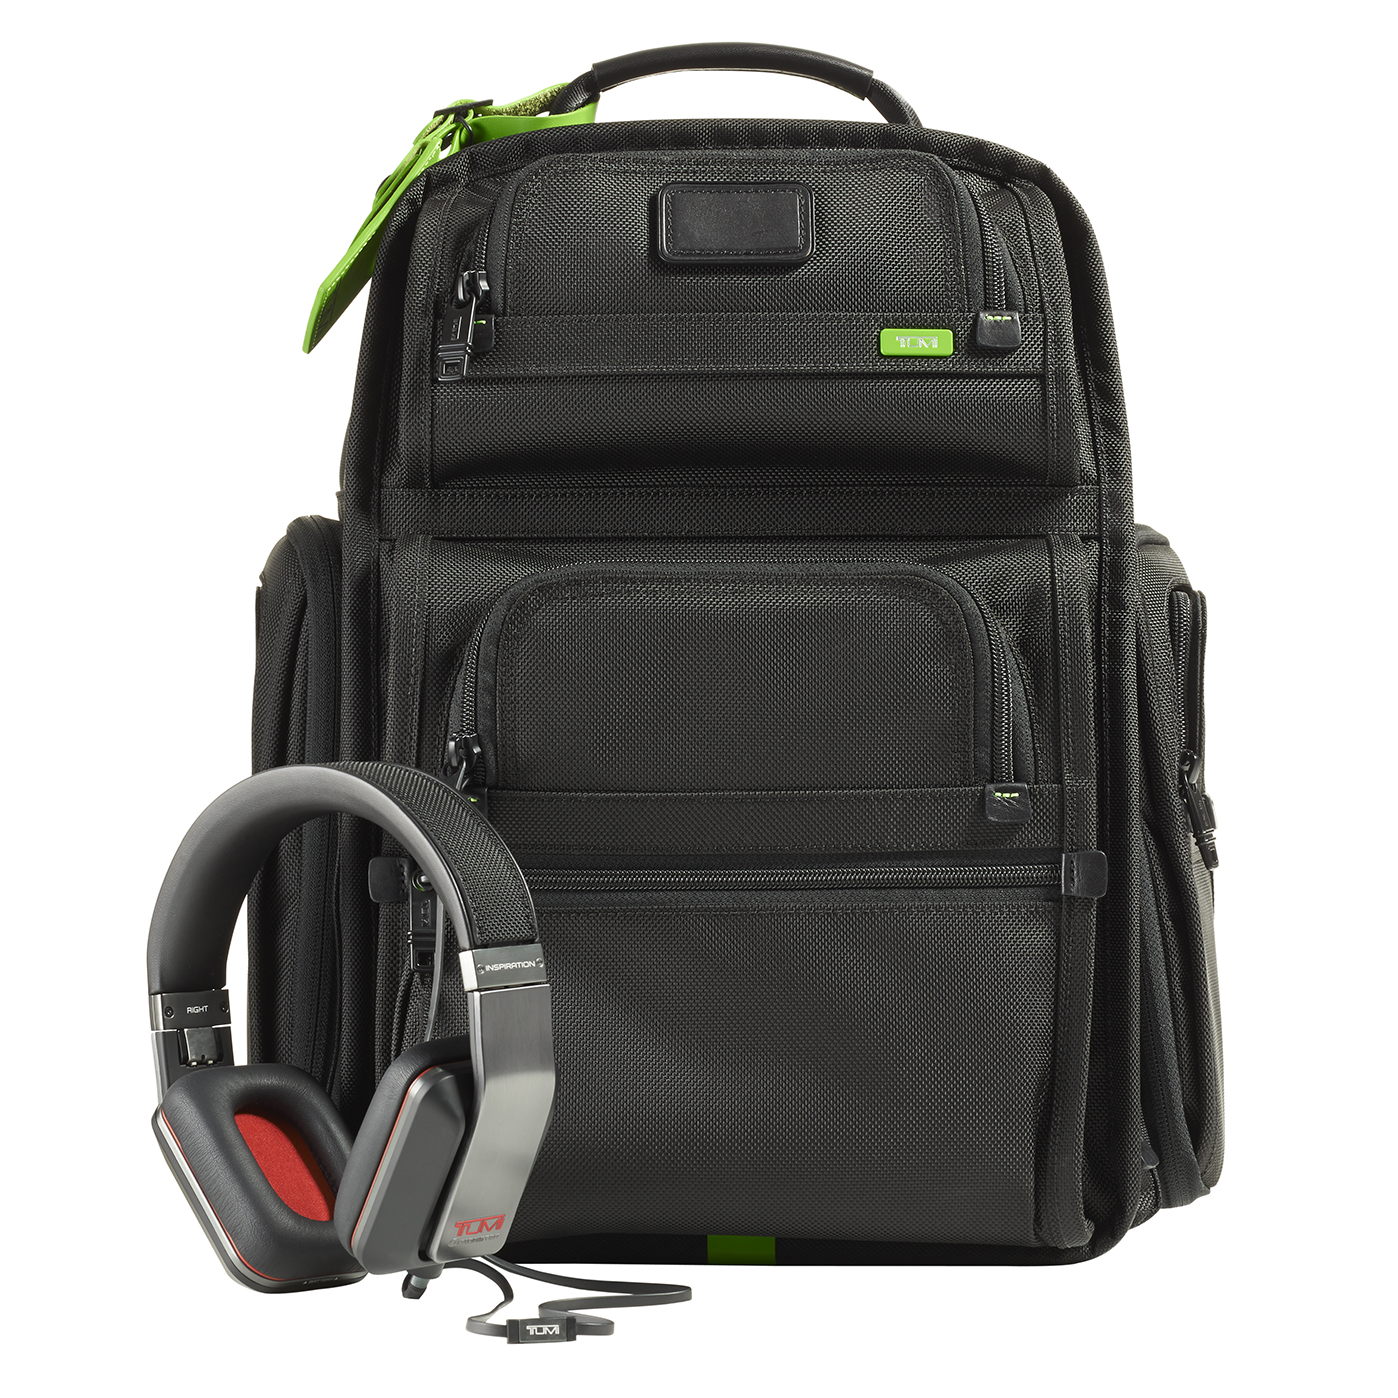 Tumi DJ Vice Limited Edition Backpack